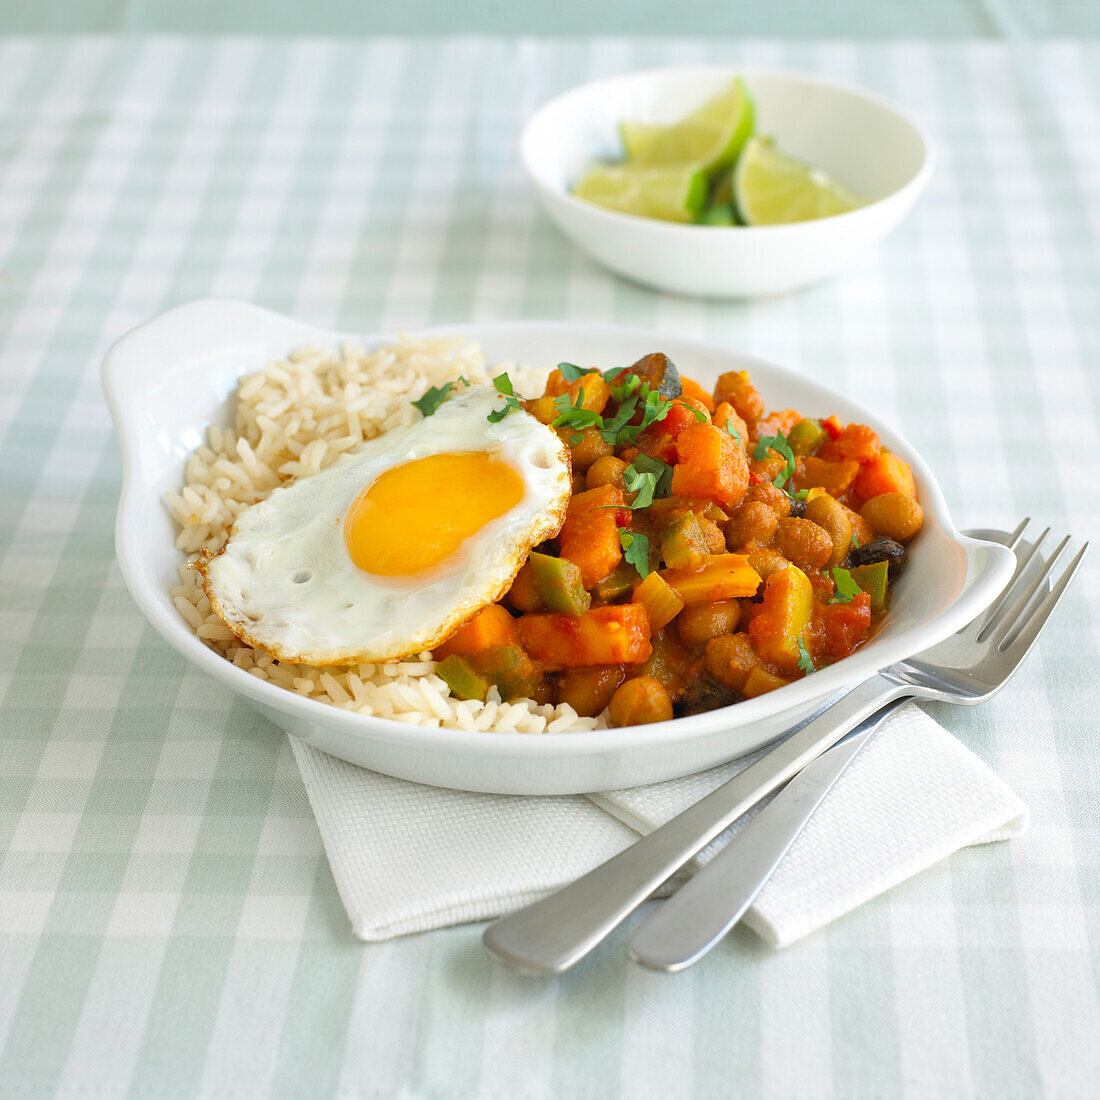 Chilli bean and vegetable braise